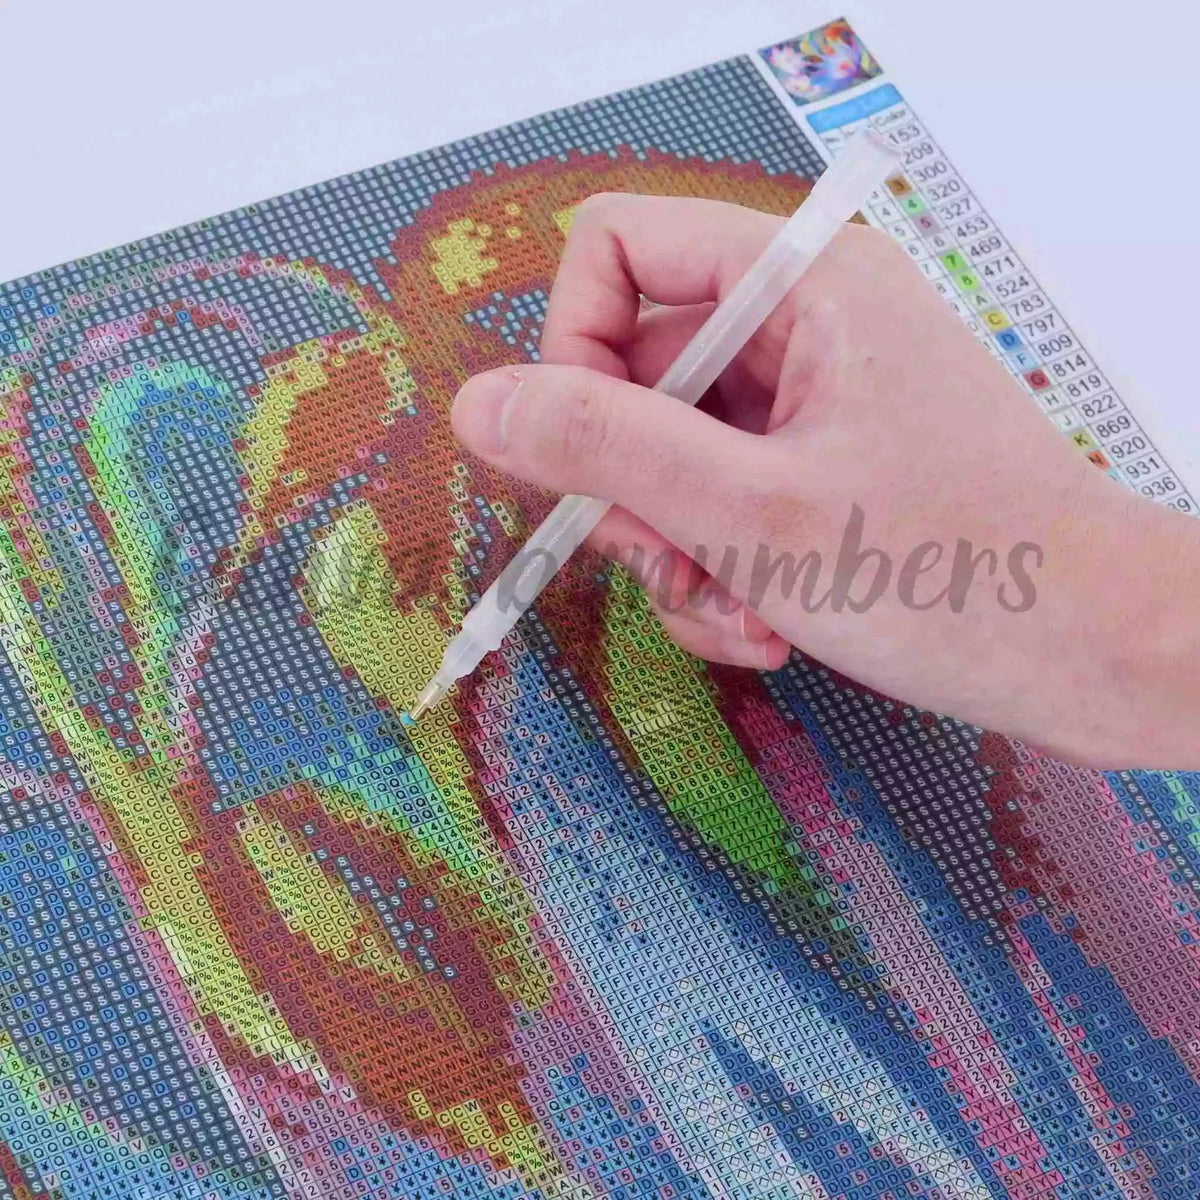 Summer - Diamond Painting-Diamond Painting-16"x20" (40x50cm) No Frame-Canvas by Numbers US